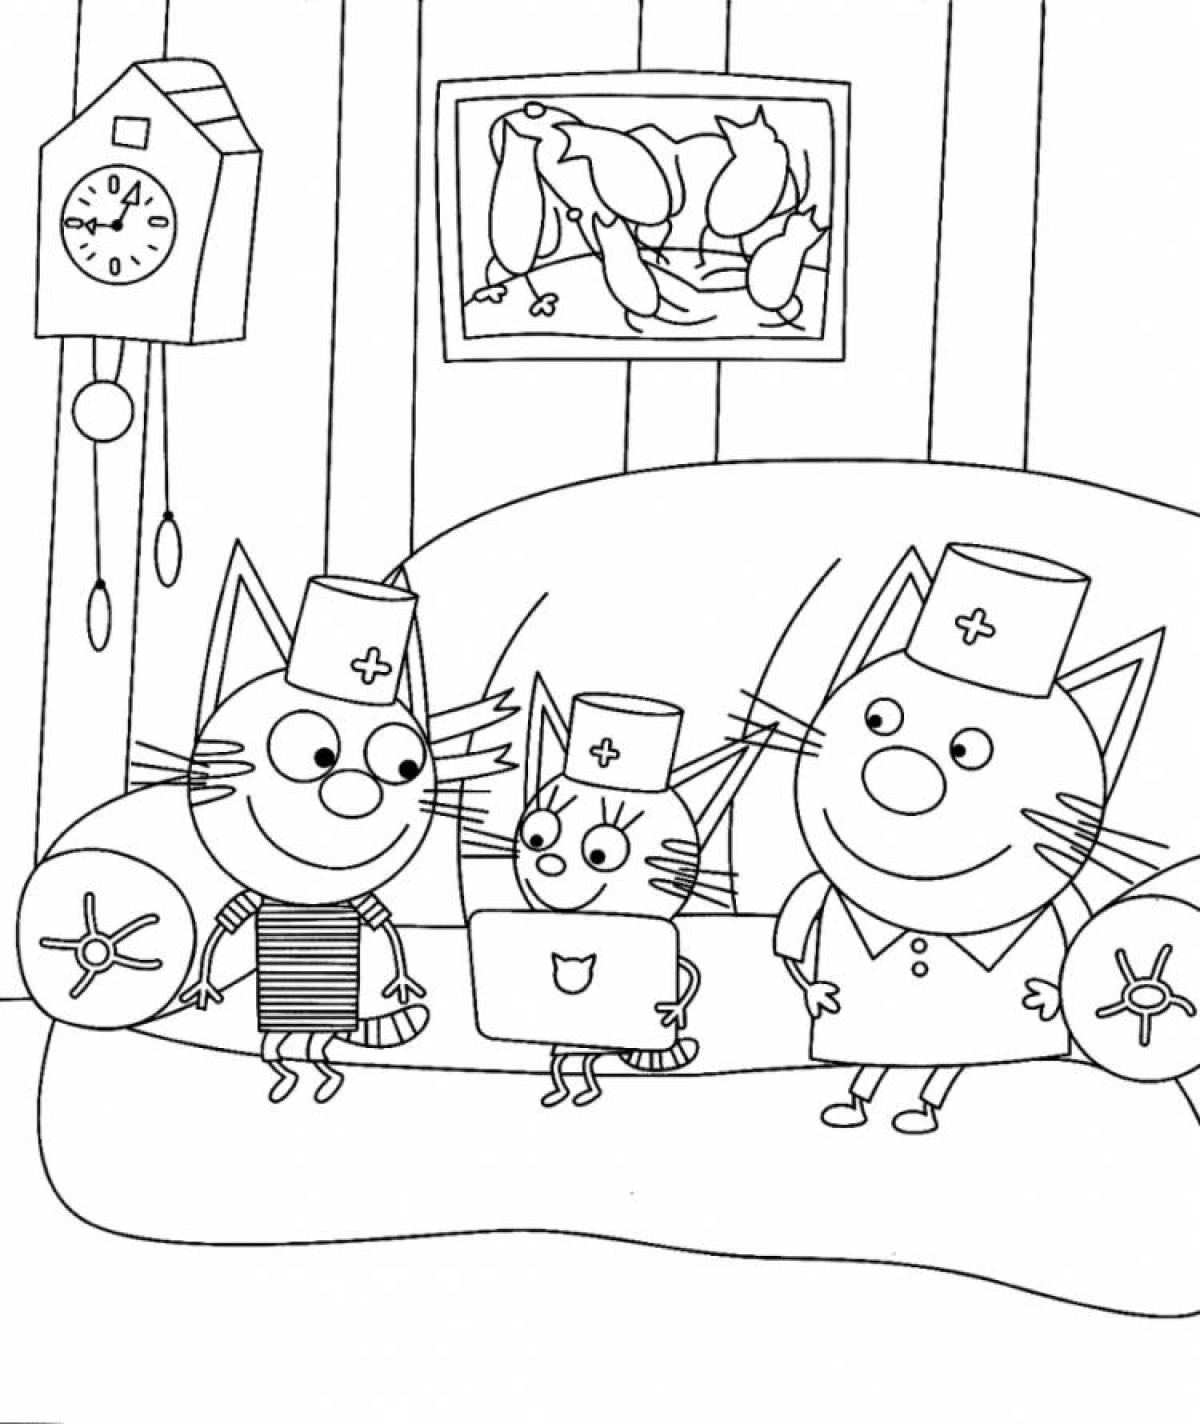 Naughty 3 cats coloring book